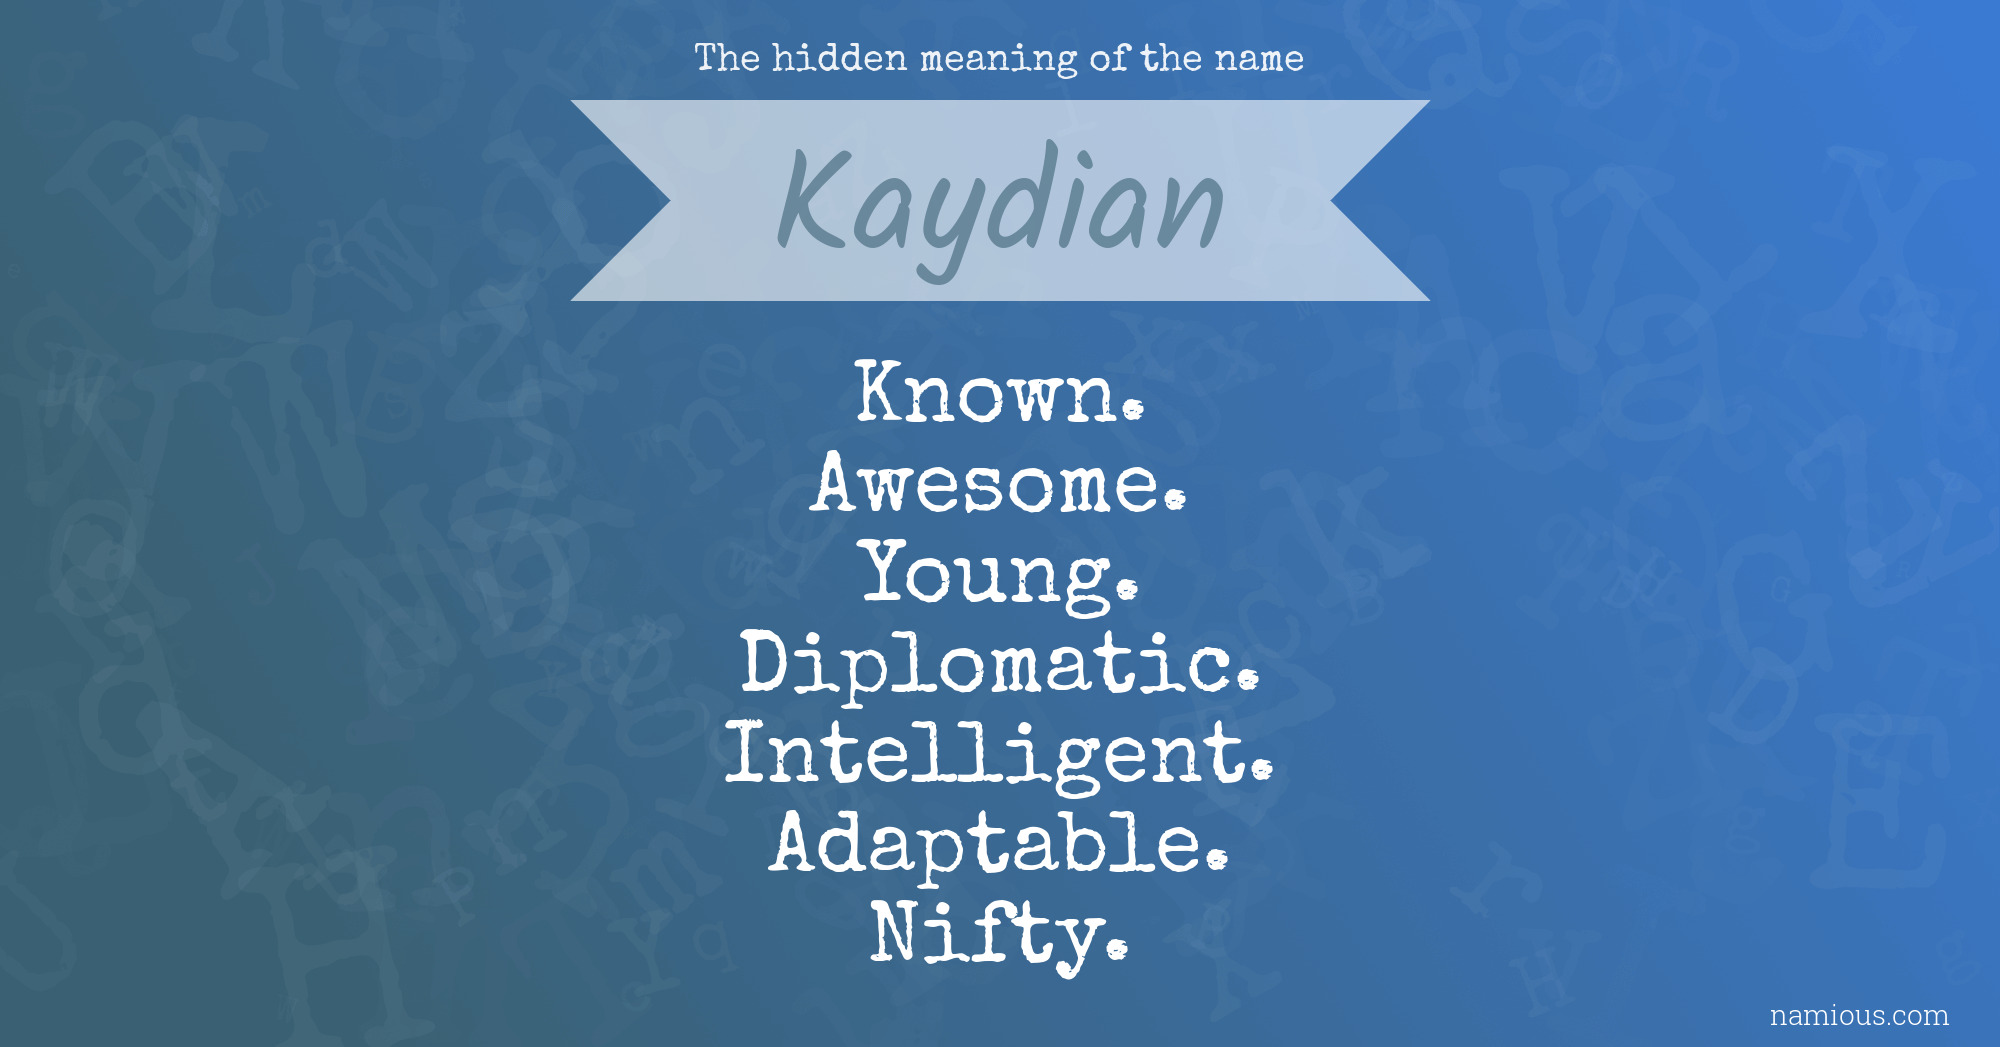 The hidden meaning of the name Kaydian